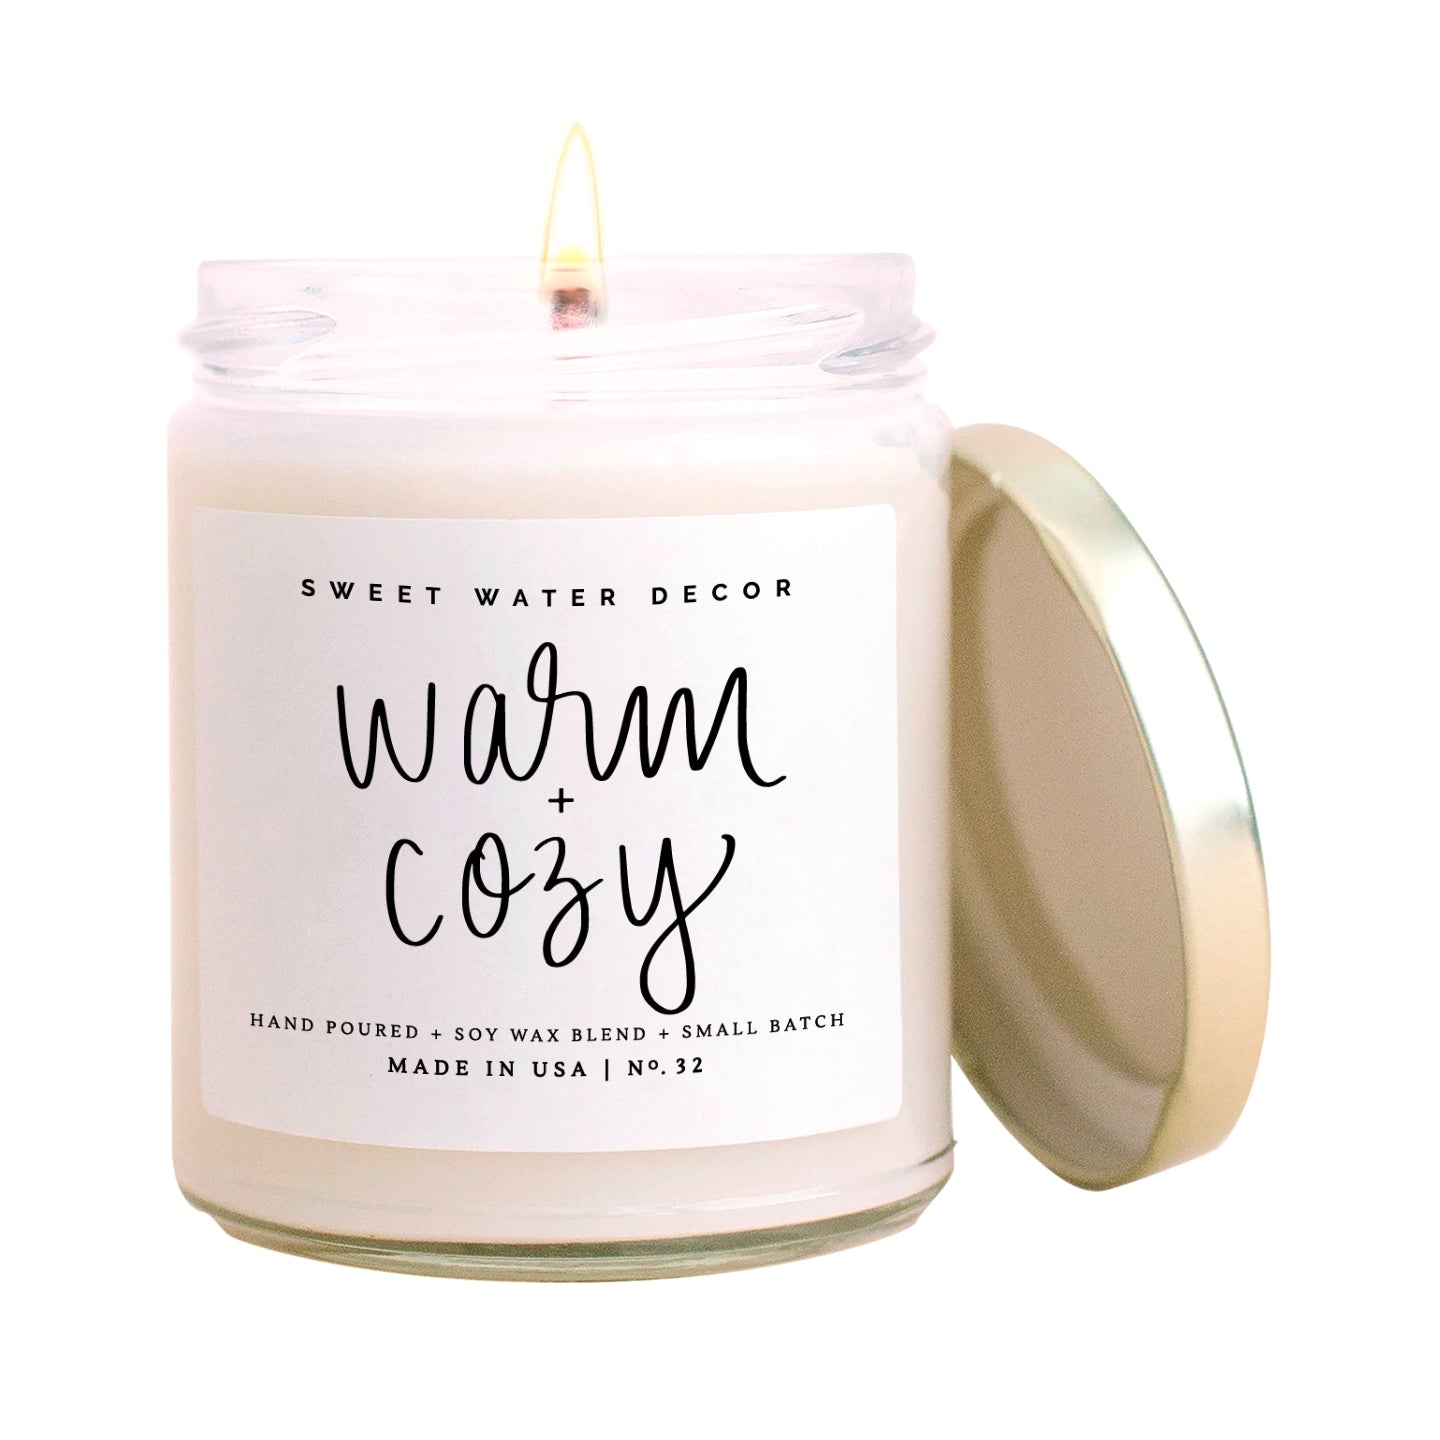 Sweet Water Decor Warm and Cozy Candle